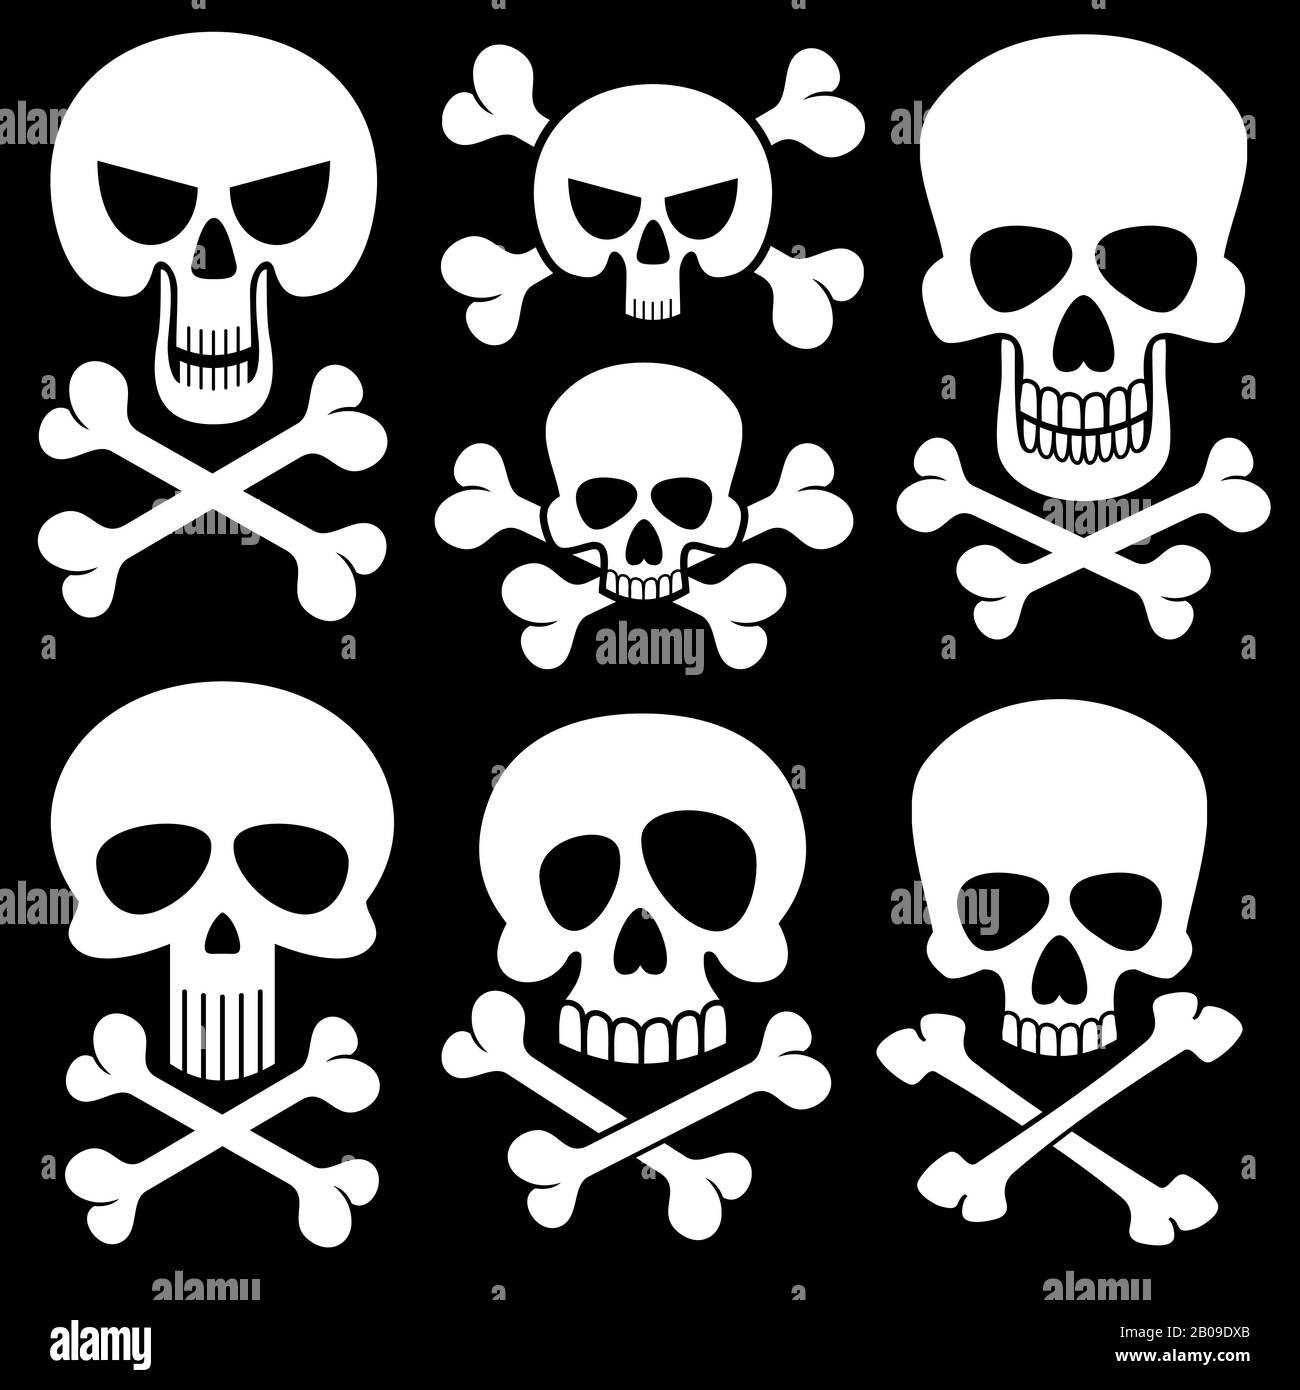 Piracy skull and crossbones vector icons. Death, scary symbols. Set of white skull and cross bones illustration Stock Vector